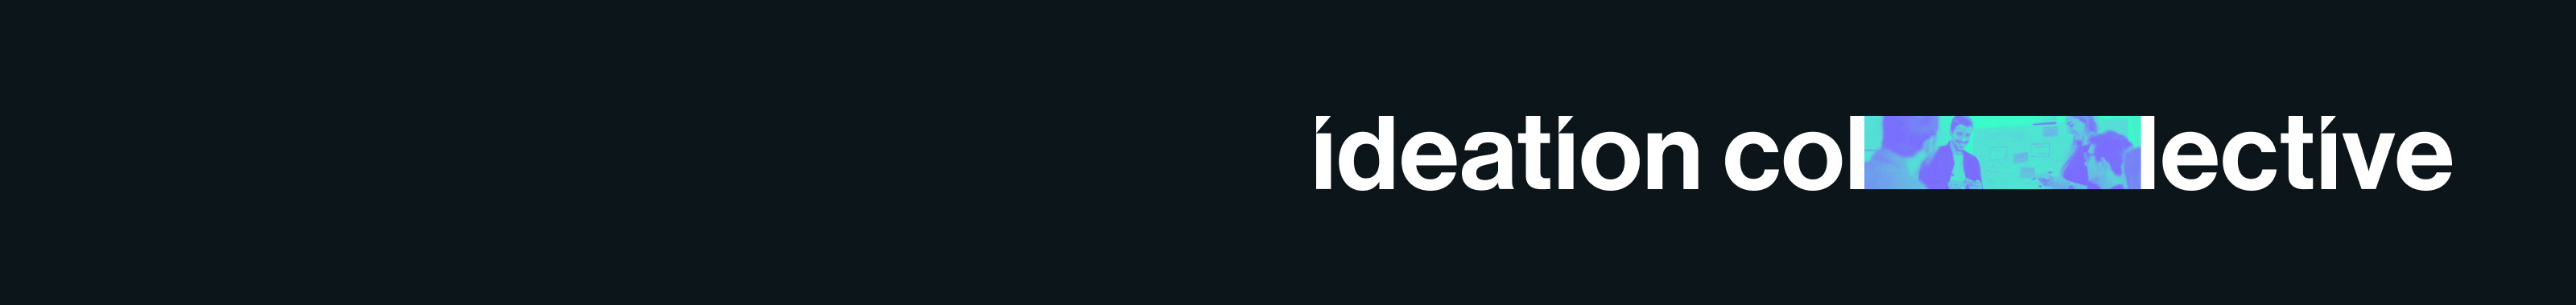 Ideation Collective's profile banner